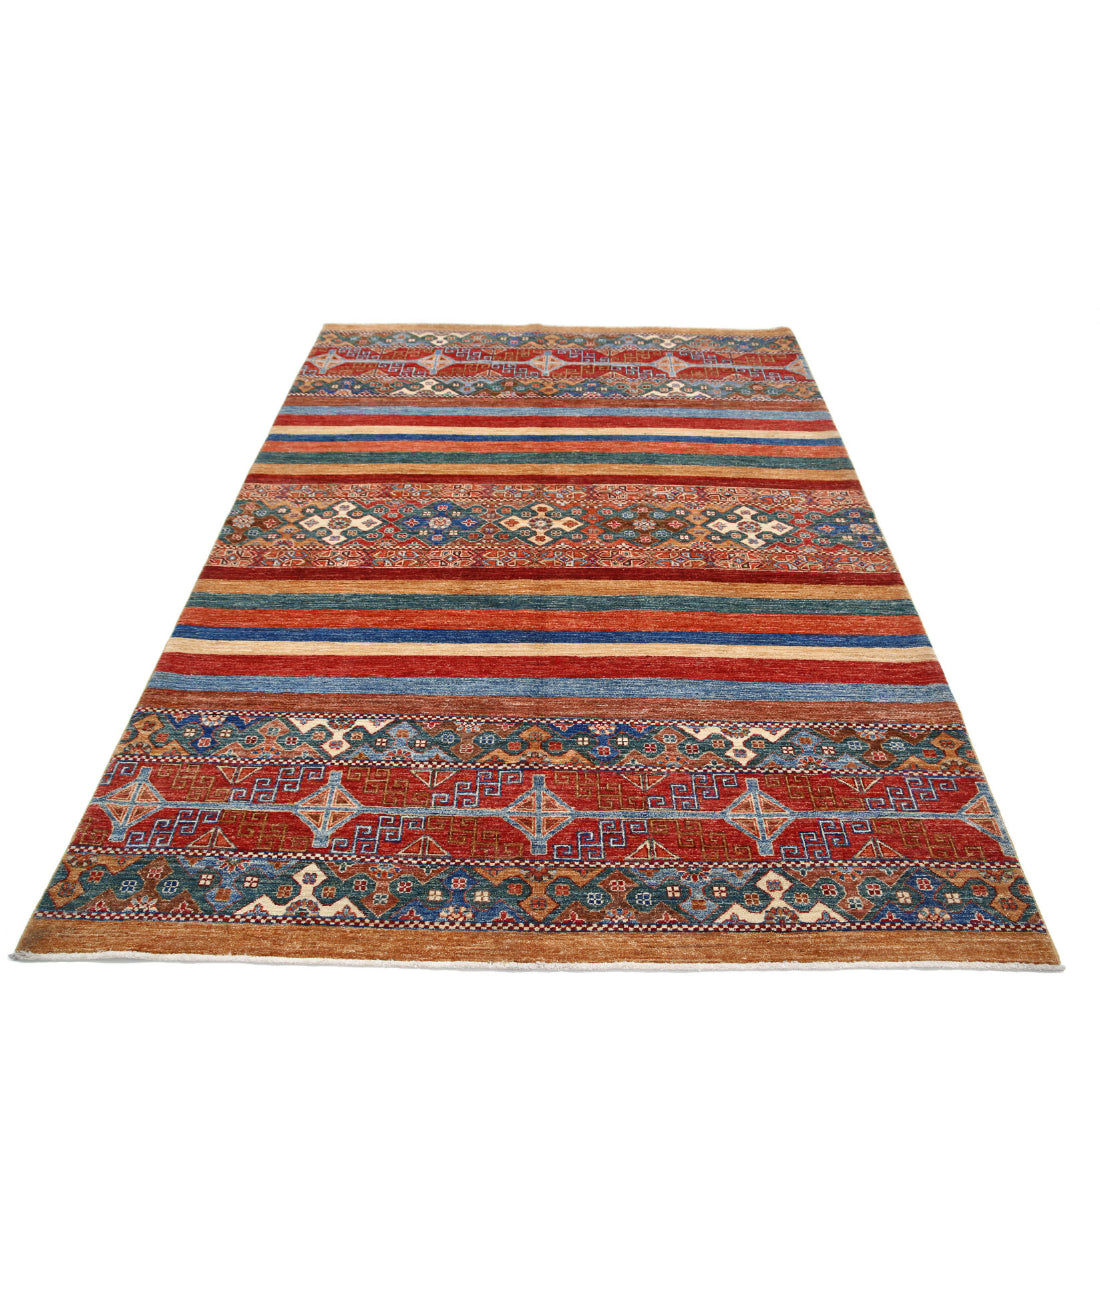 Hand Knotted Khurjeen Wool Rug - 5'9'' x 7'9'' 5'9'' x 7'9'' (173 X 233) / Multi / Multi